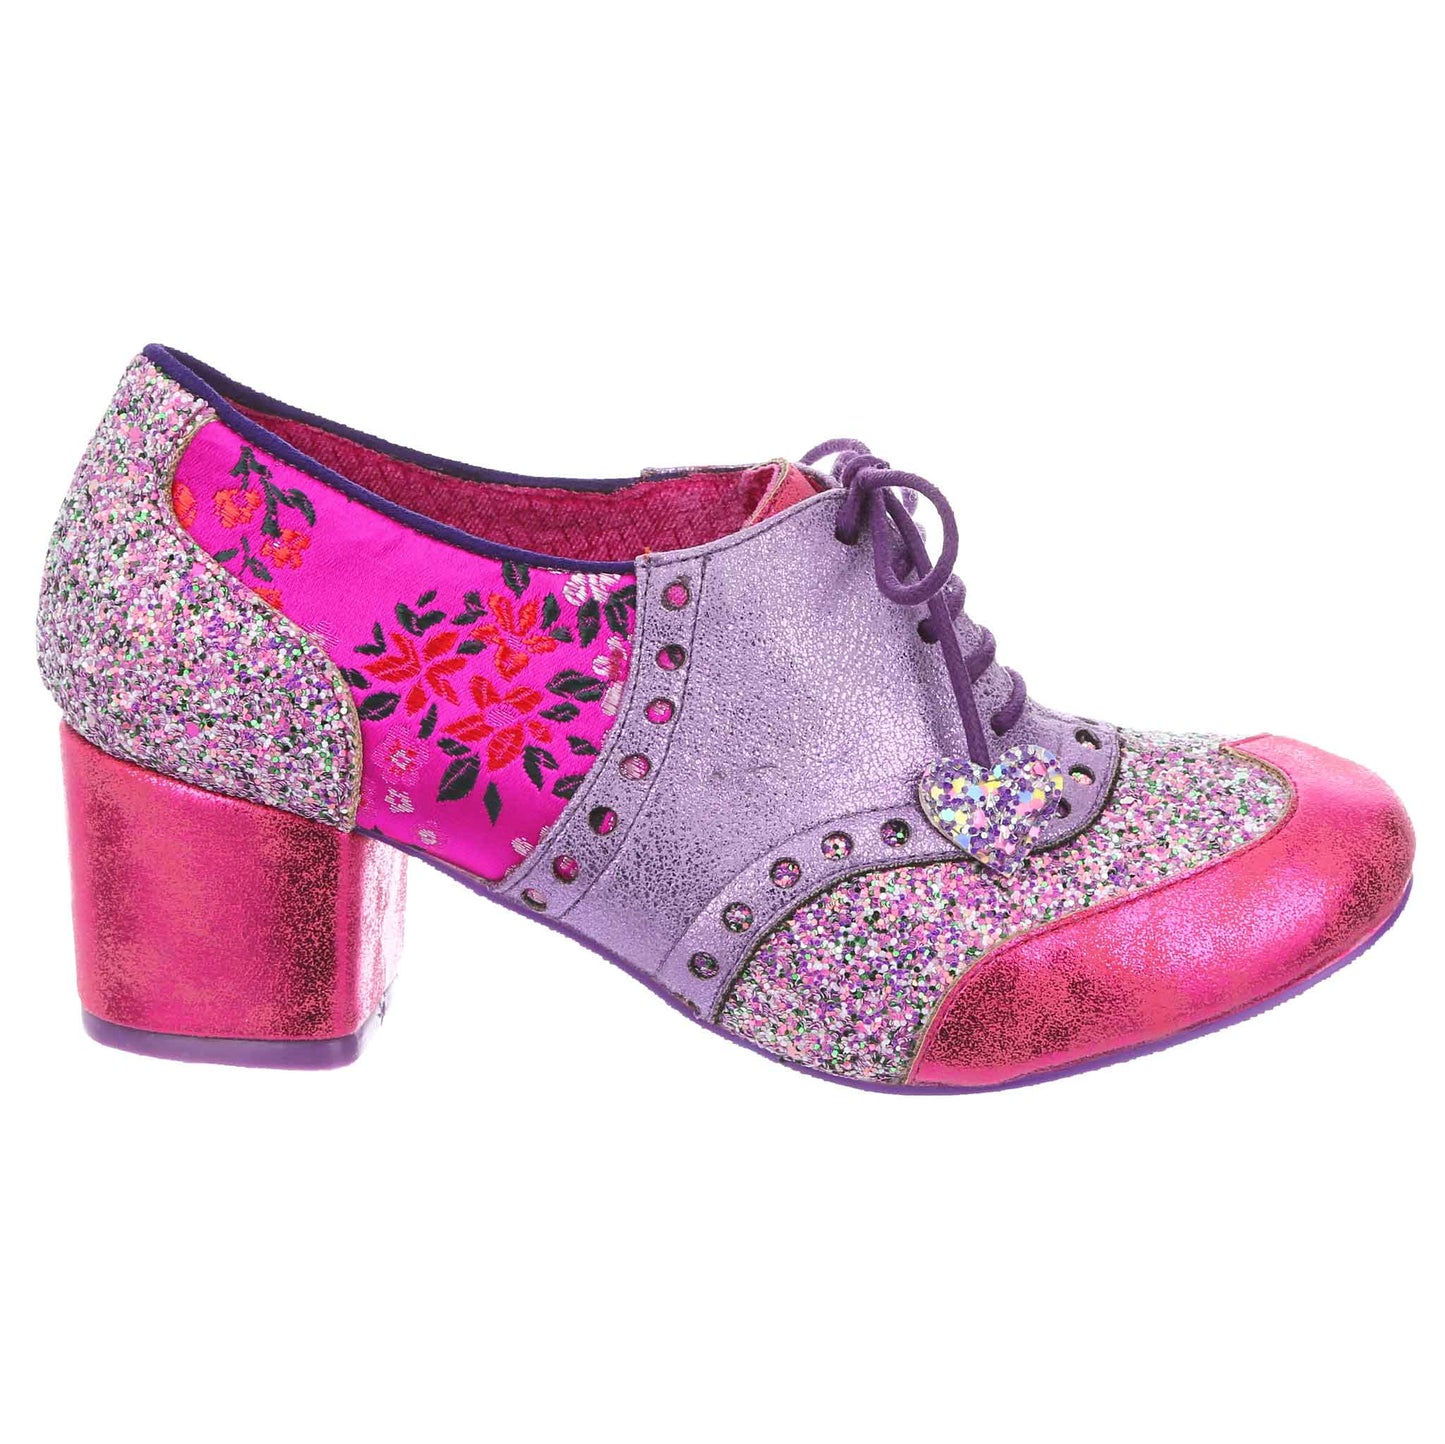 Irregular Choice Women's Clara Bow 3908-08 AG Lace Up Shoes Pink Lavender